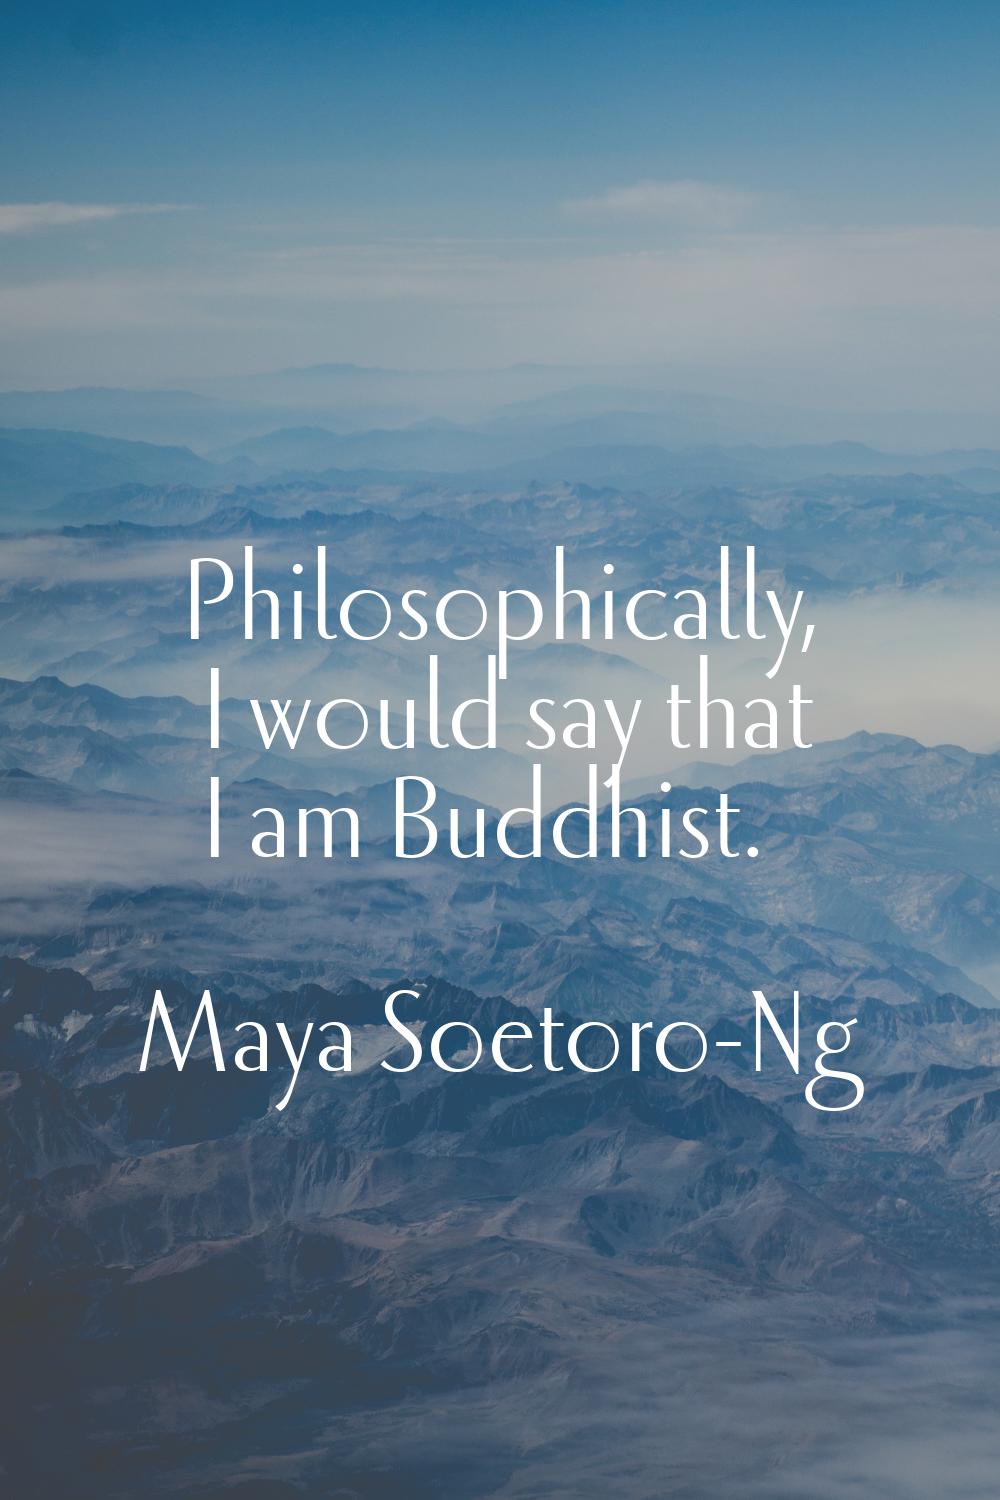 Philosophically, I would say that I am Buddhist.